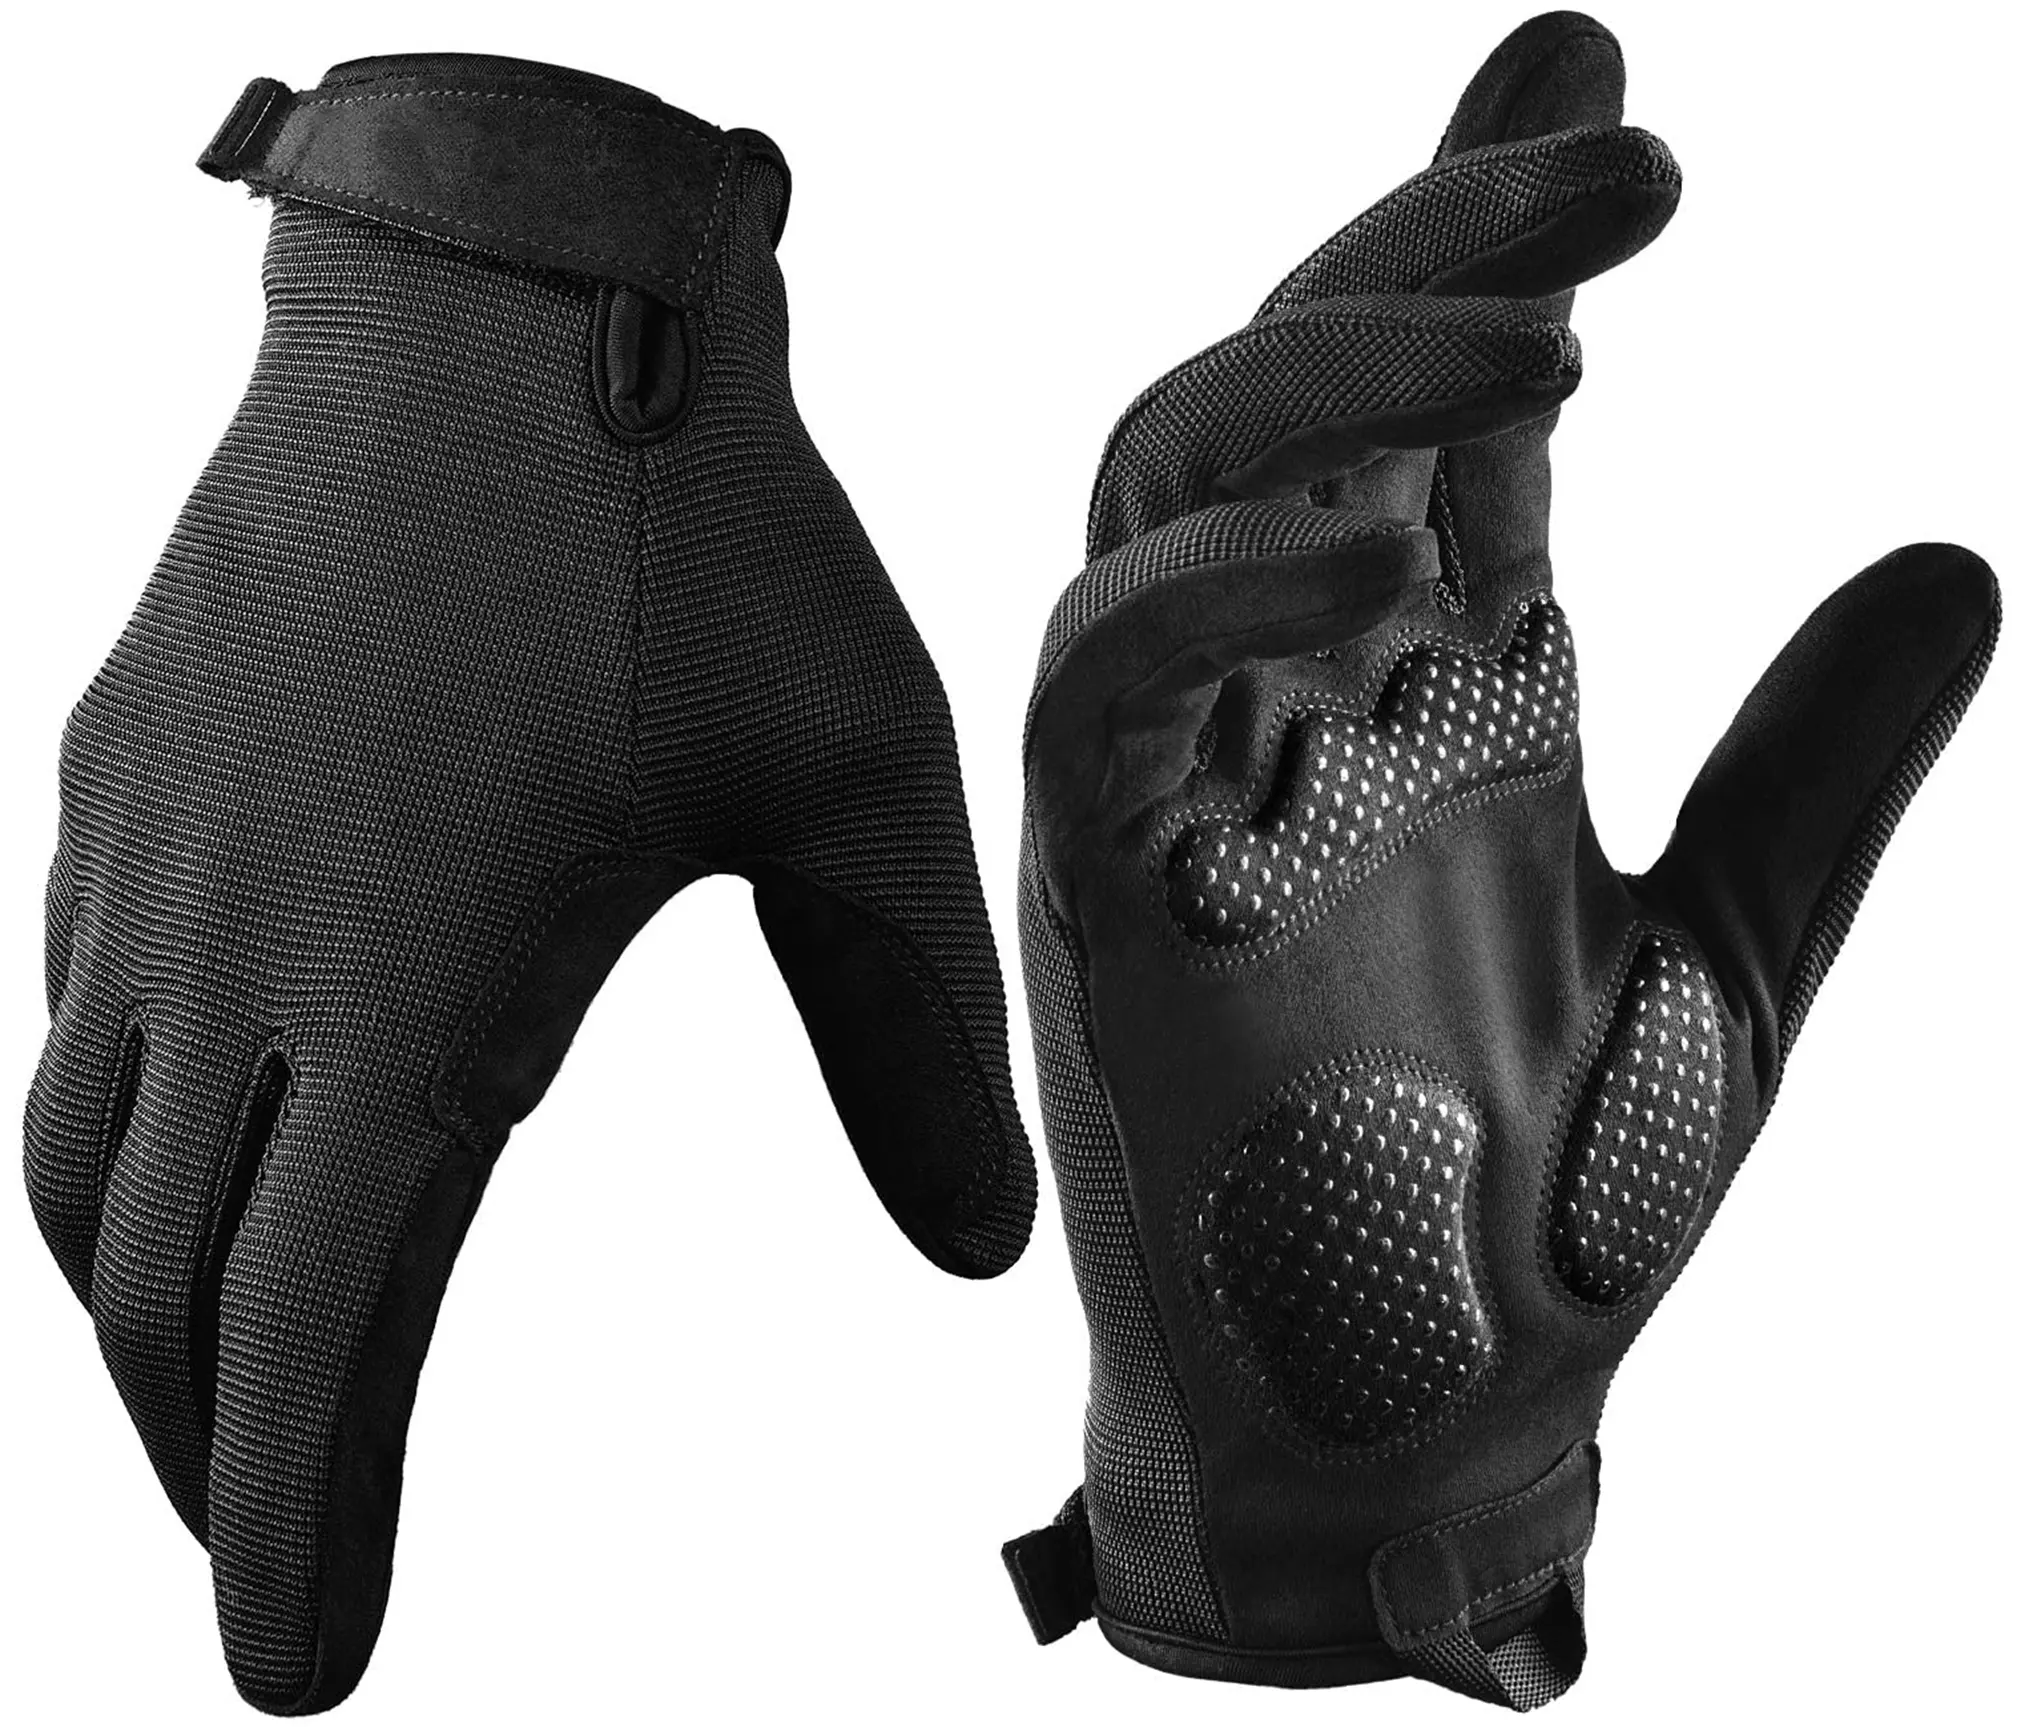 Amazon Hot Selling Full Finger Gym Workout Gloves With Touch Screen for Men Women